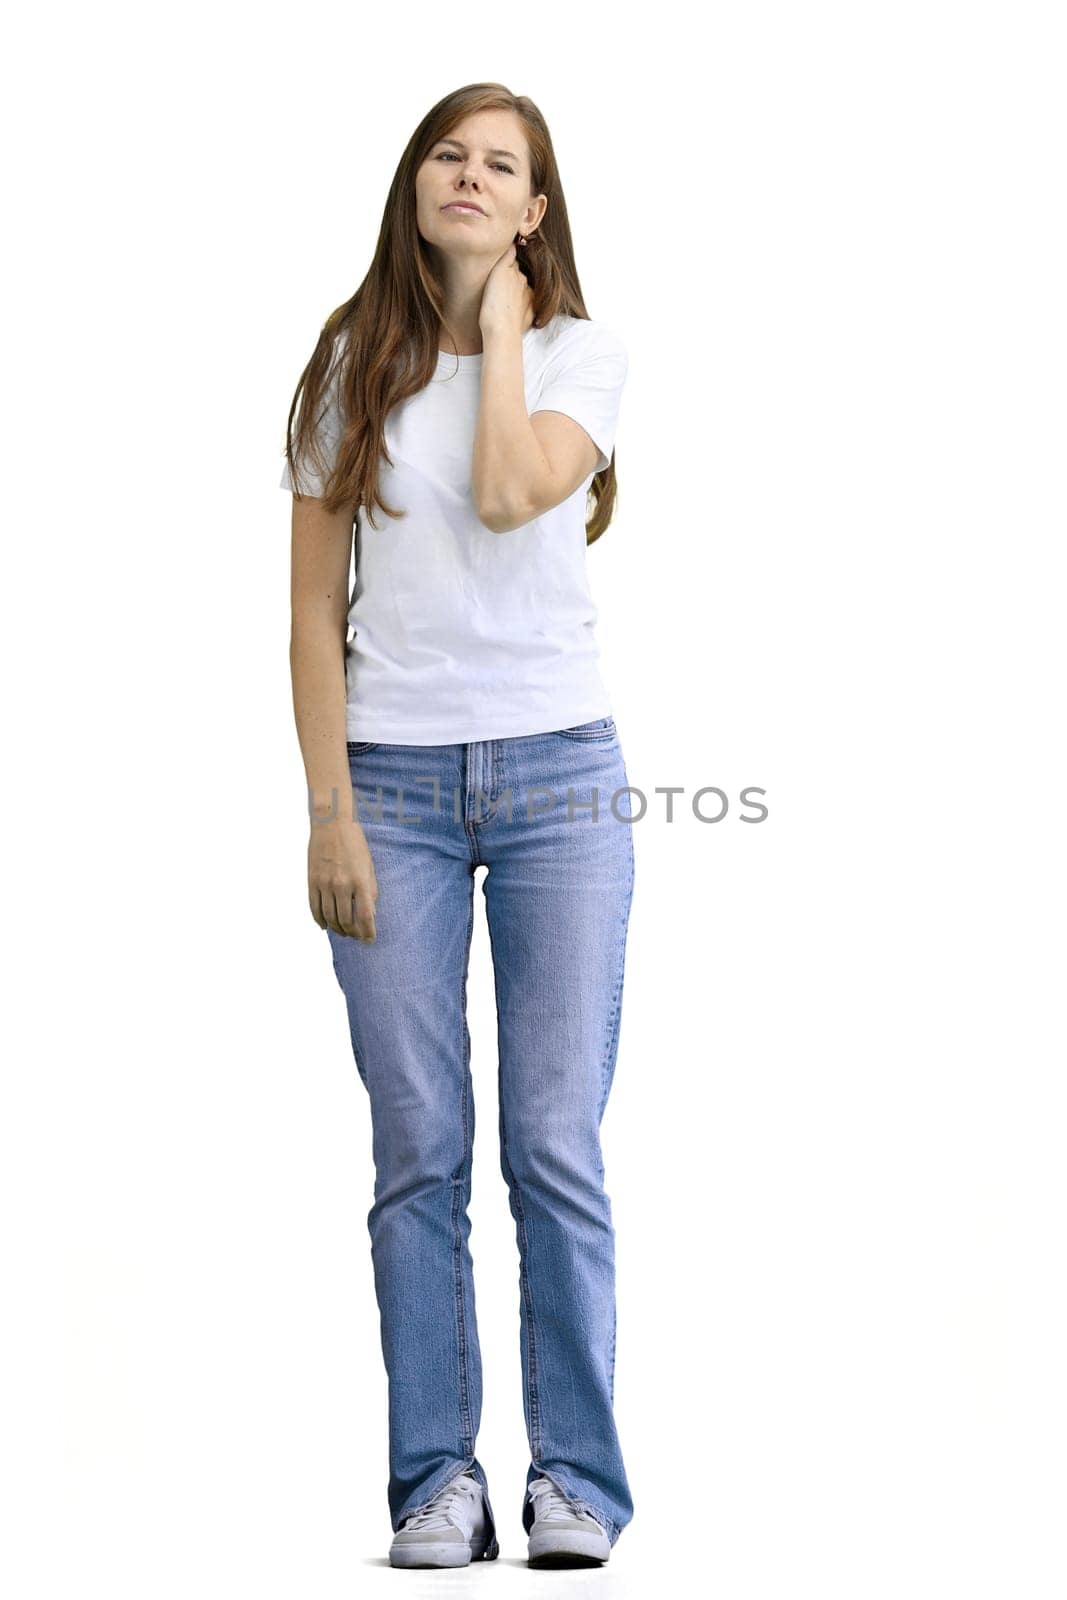 A woman, full-length, on a white background, tired.